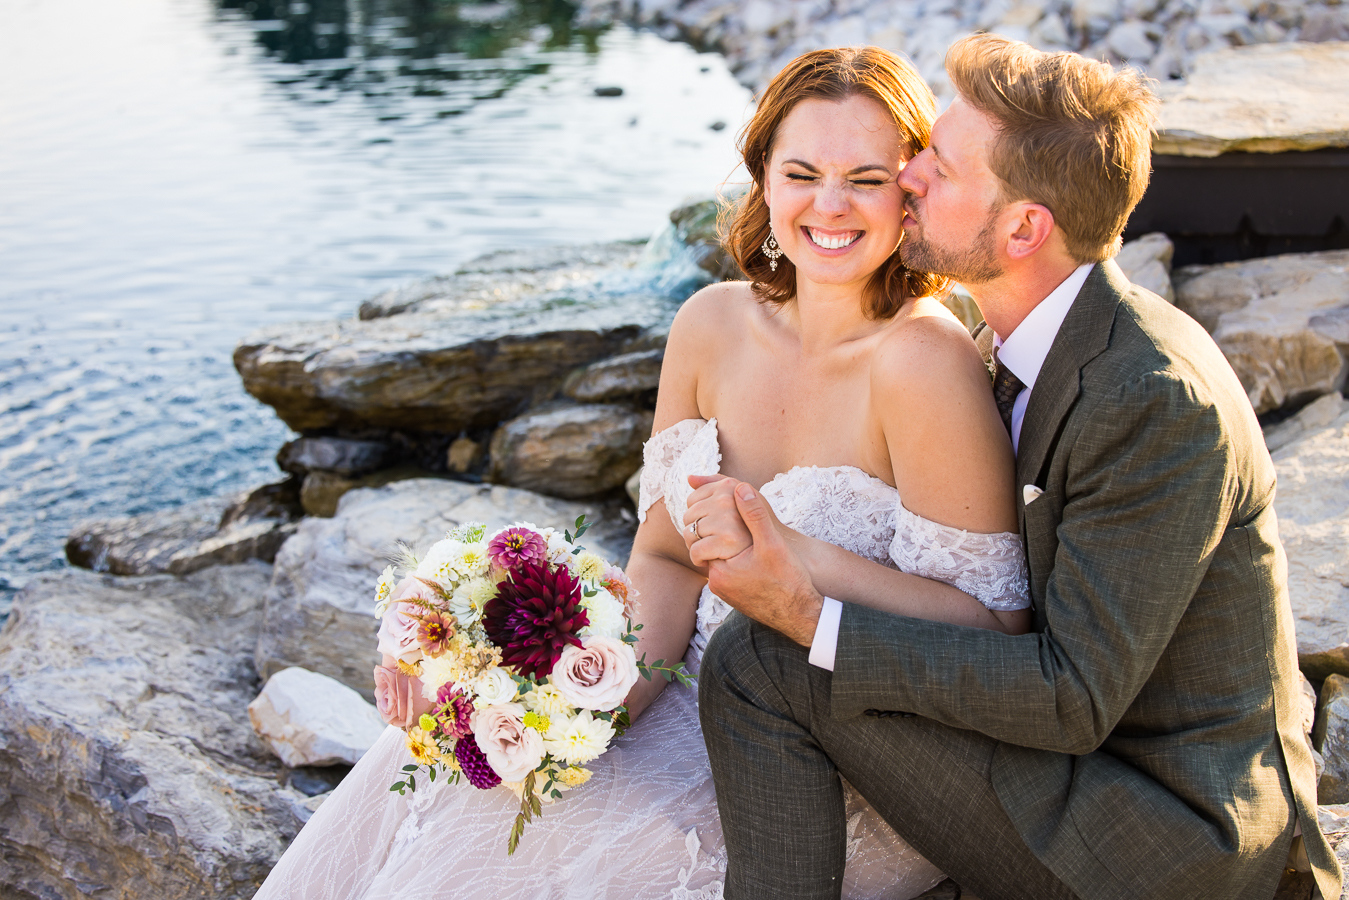 image of the bride and groom as they sit on the rocks near the vibrant blue pond and the groom kisses her on the cheek while they hold hands 